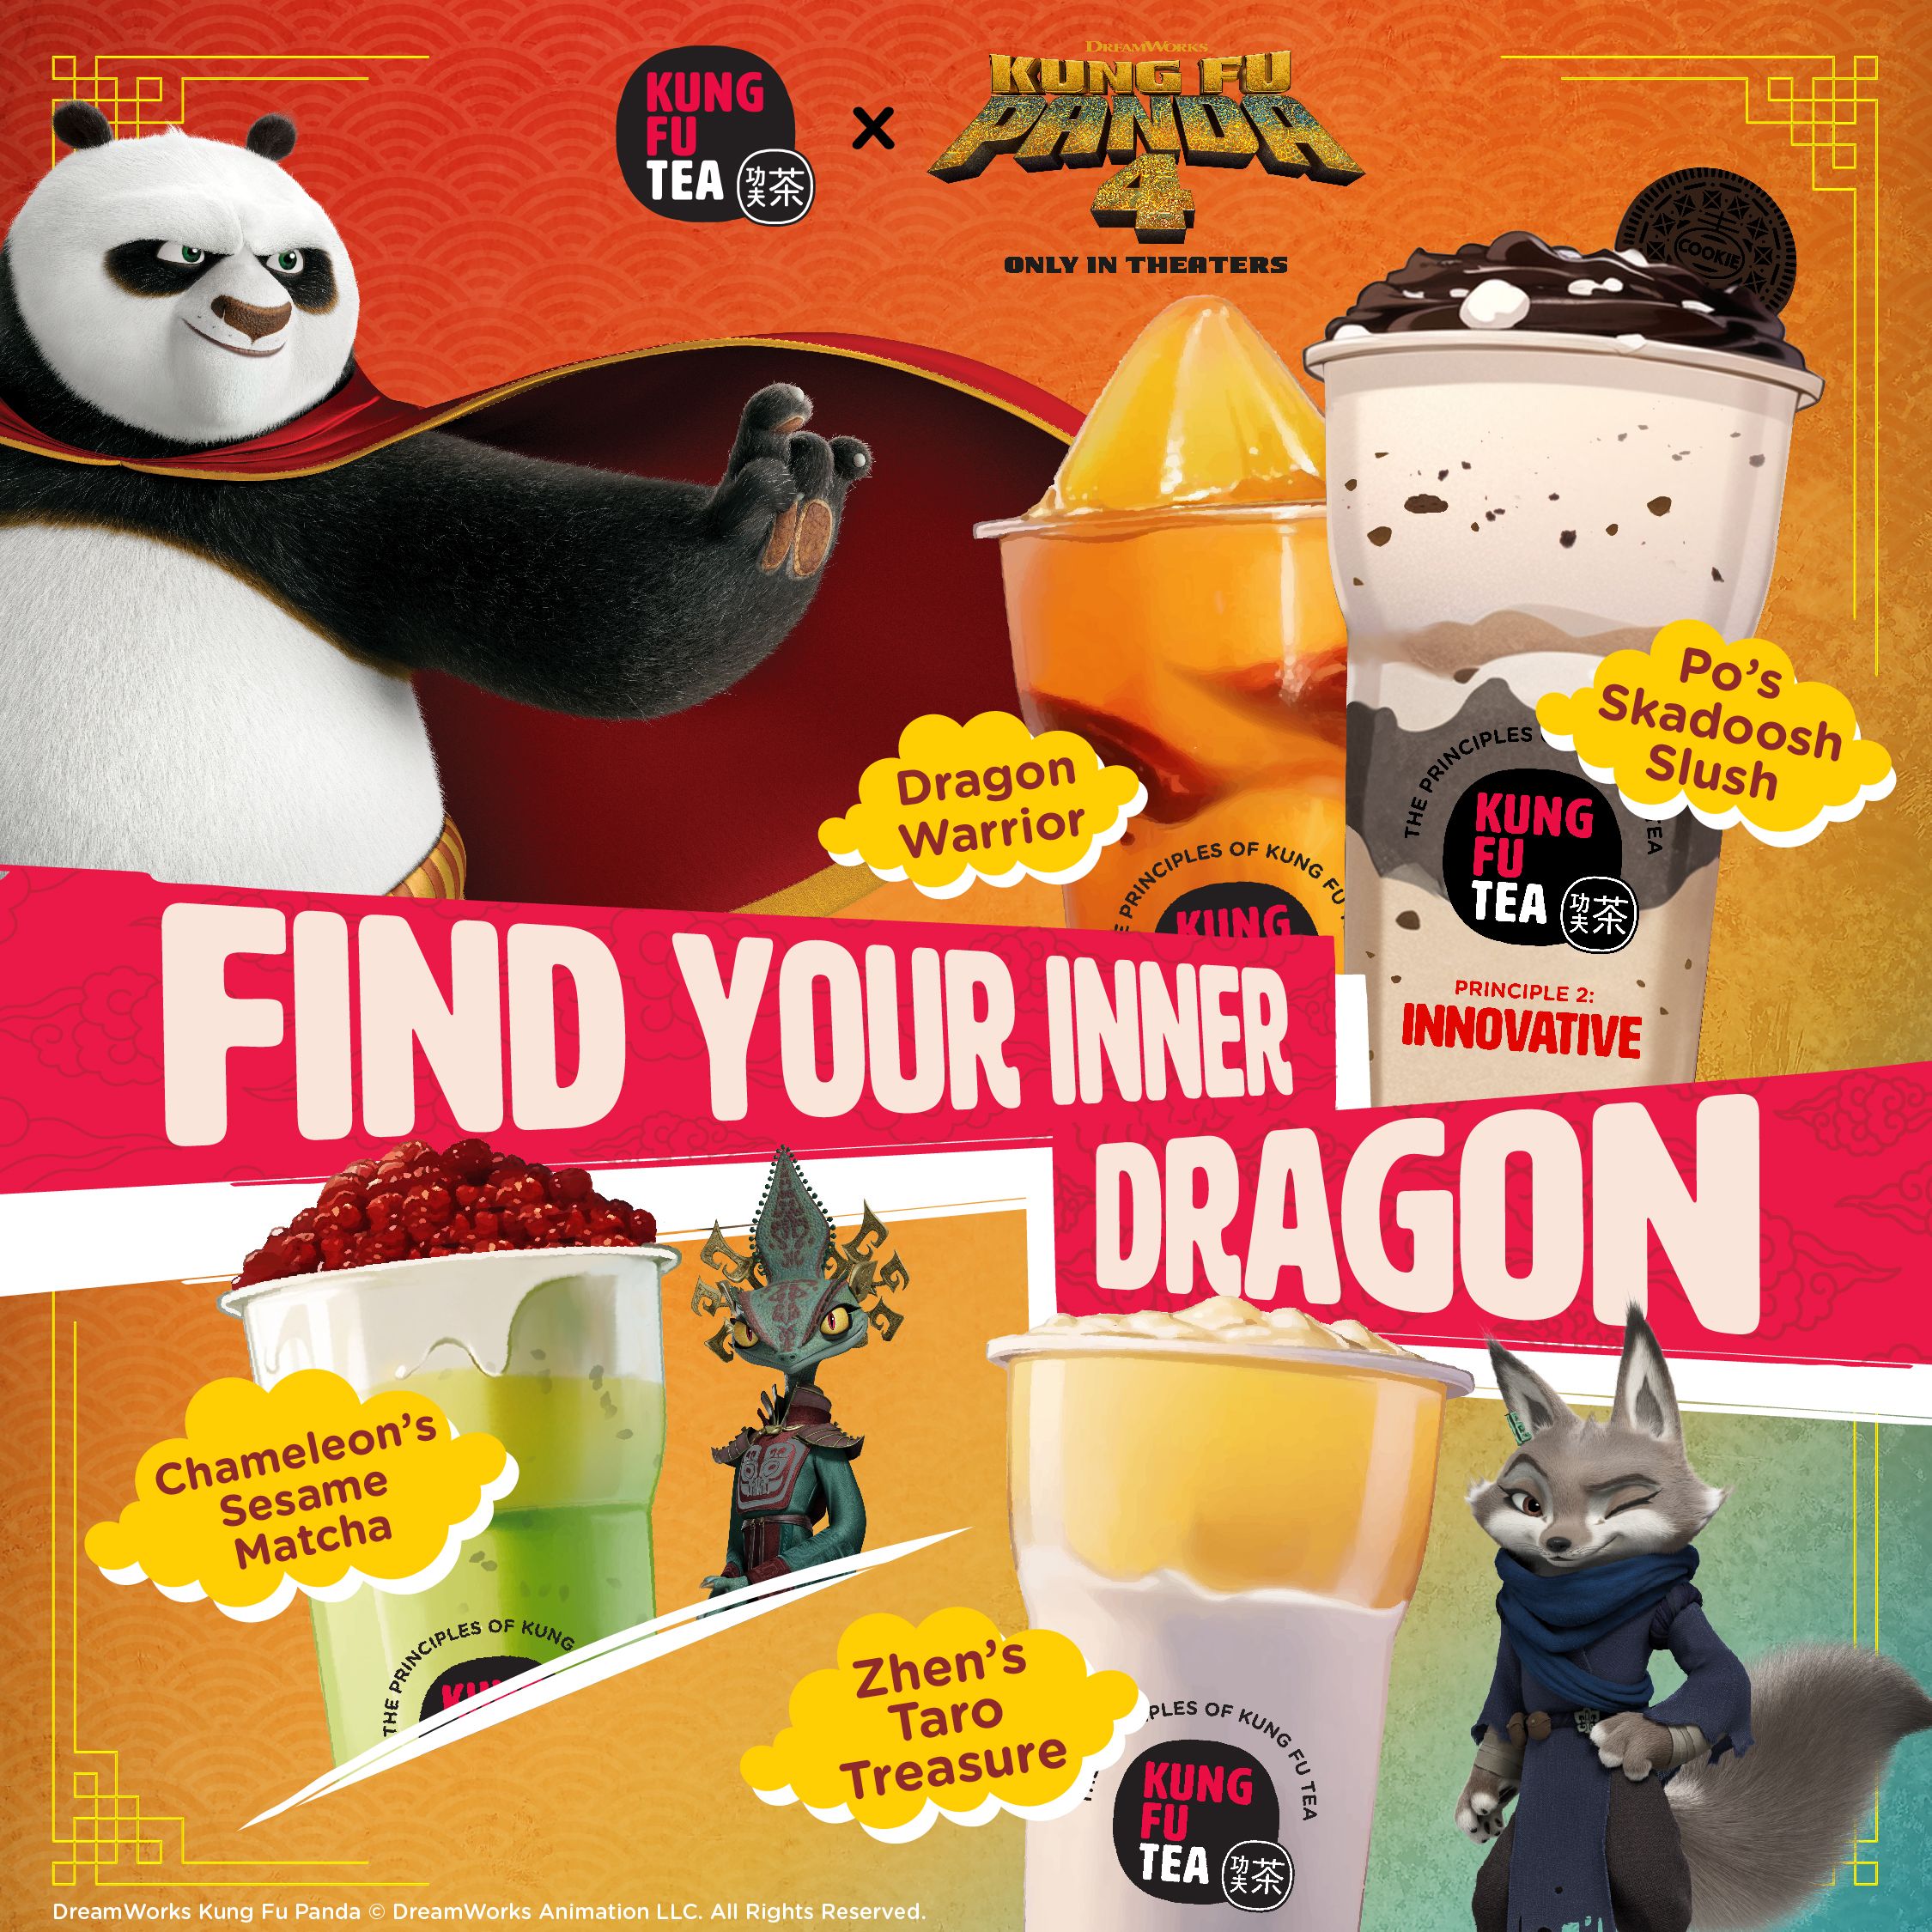 Kung Fu Tea Partners with DreamWorks Animation for Kung Fu Panda 4, in Theaters March 8